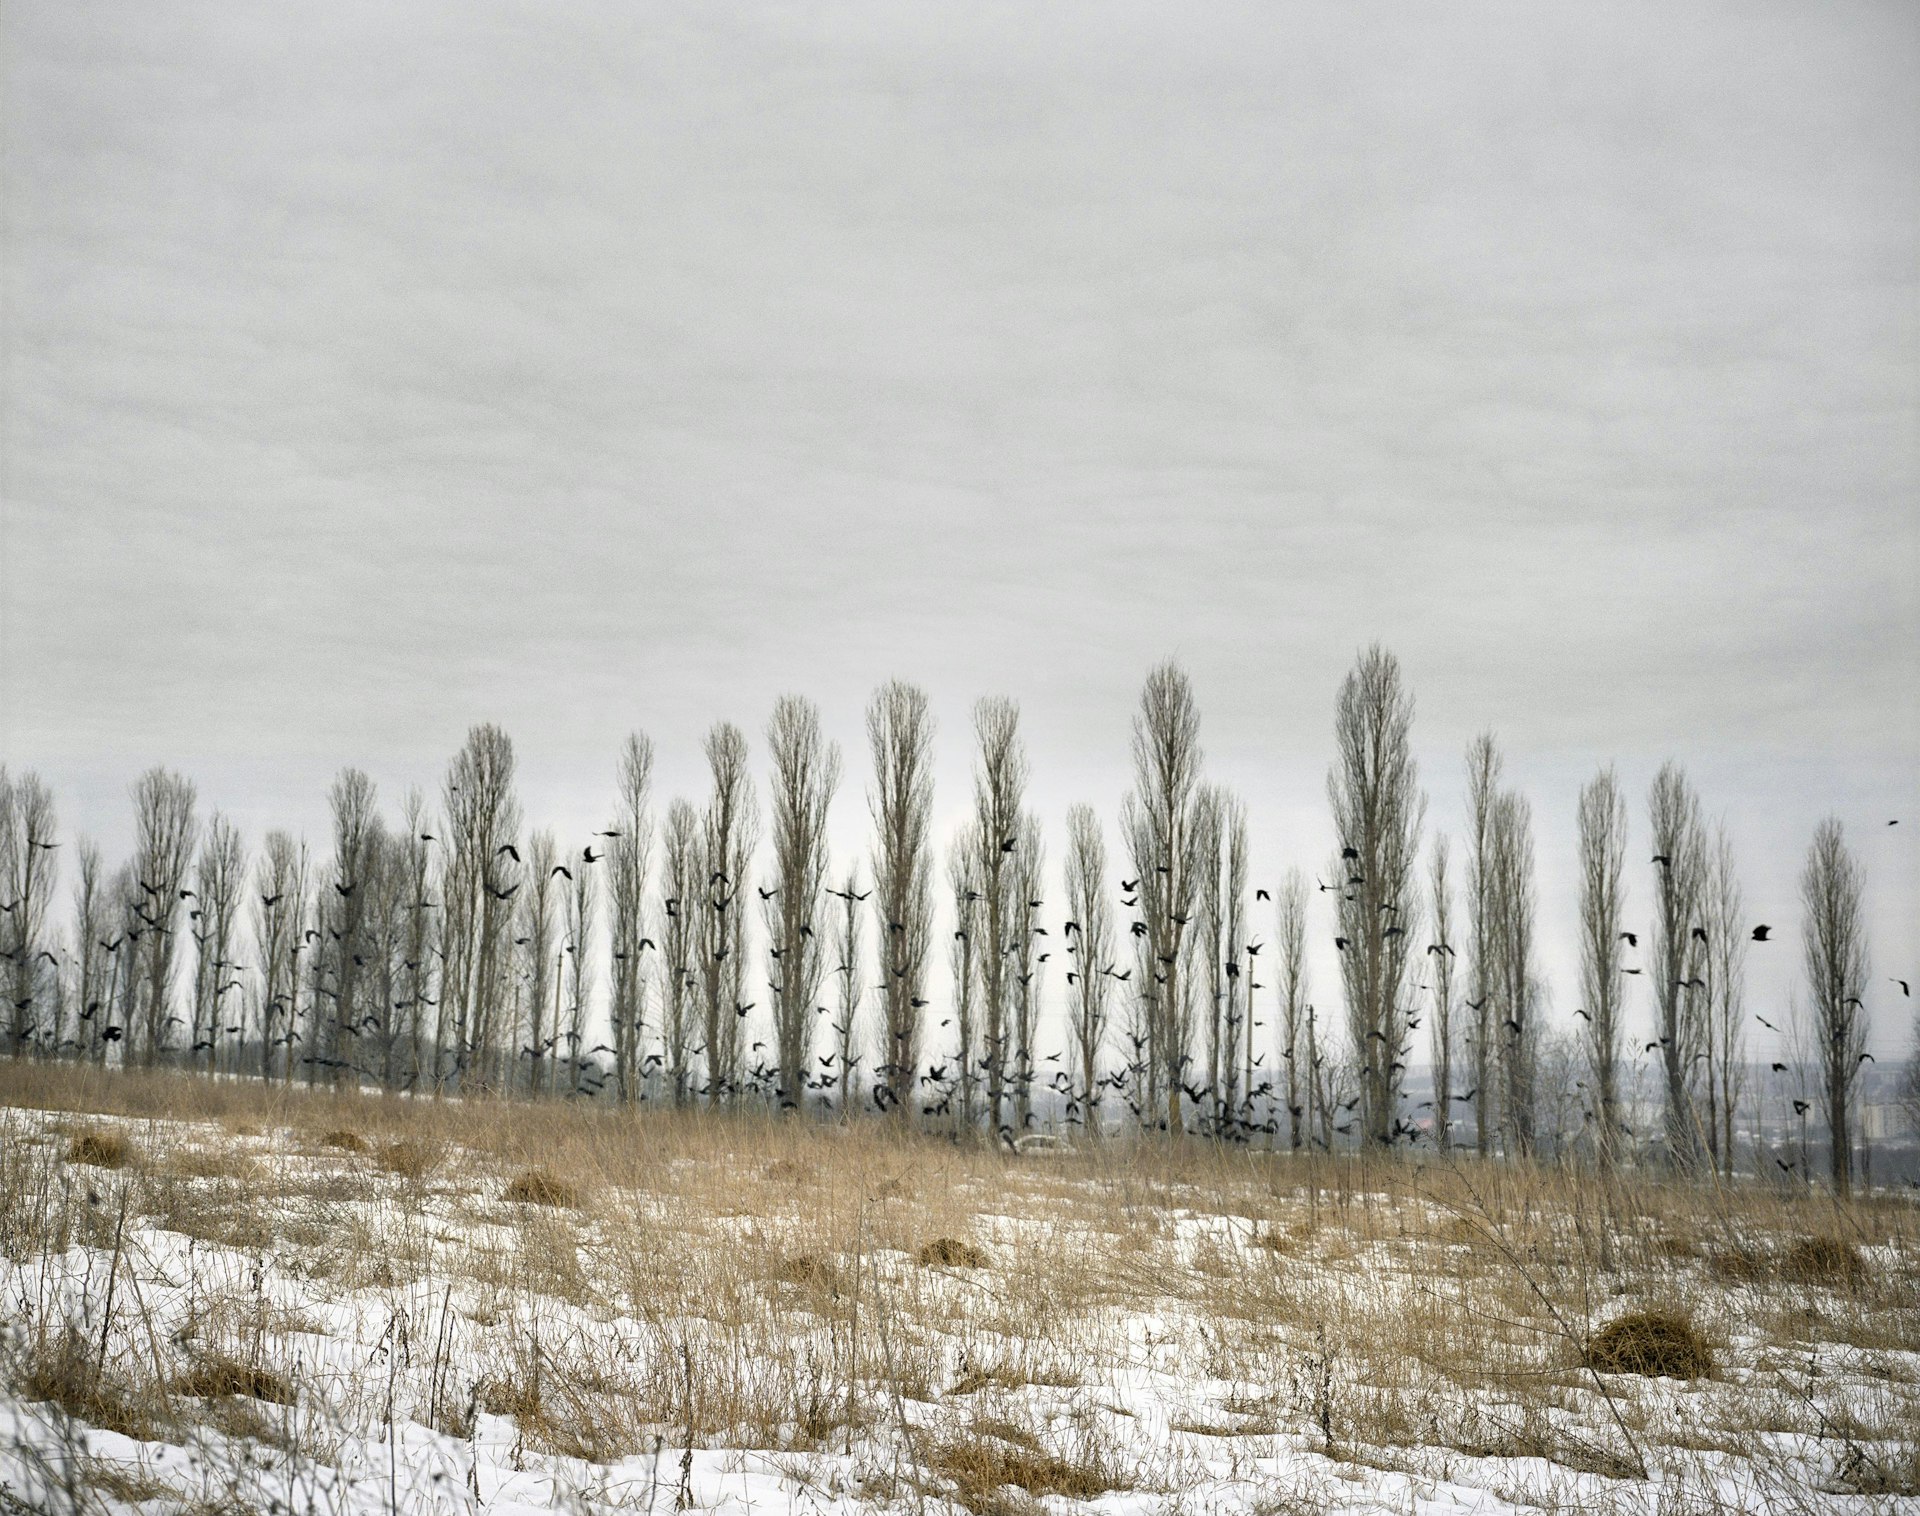 ‘Open See’, Ukraine, 2007 © Jim Goldberg, from ‘War Is Only Half The Story’, The Aftermath Project & Dewi Lewis Publishing